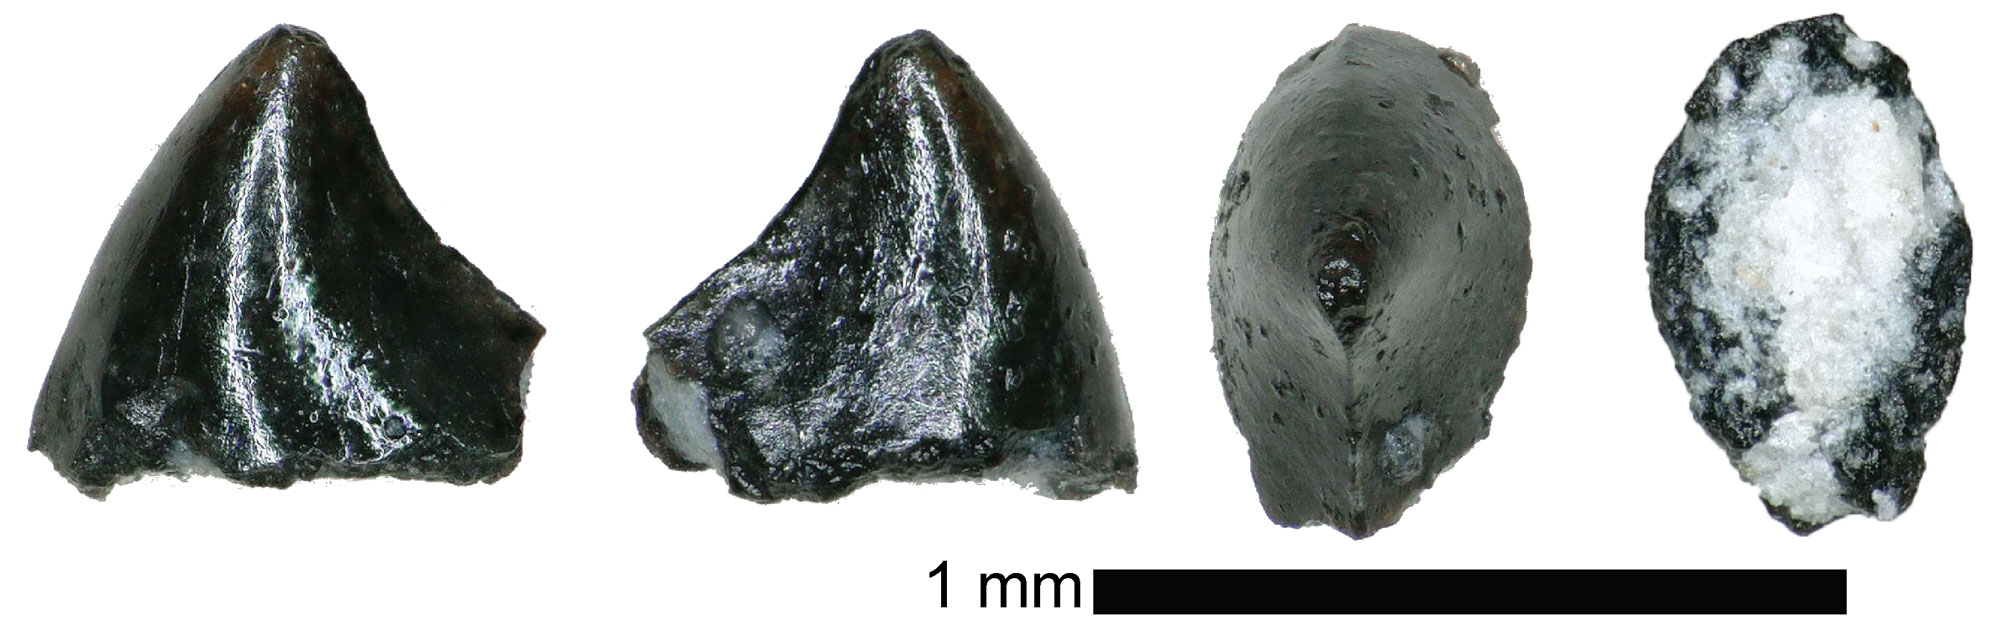 Image showing four photographs of a fossil marsupial (pounched mammal) tooth in four orientations, each side, top, and bottom. The tooth is black in color, conical and slightly curved in shape, with a slightly rounded point at the tip.